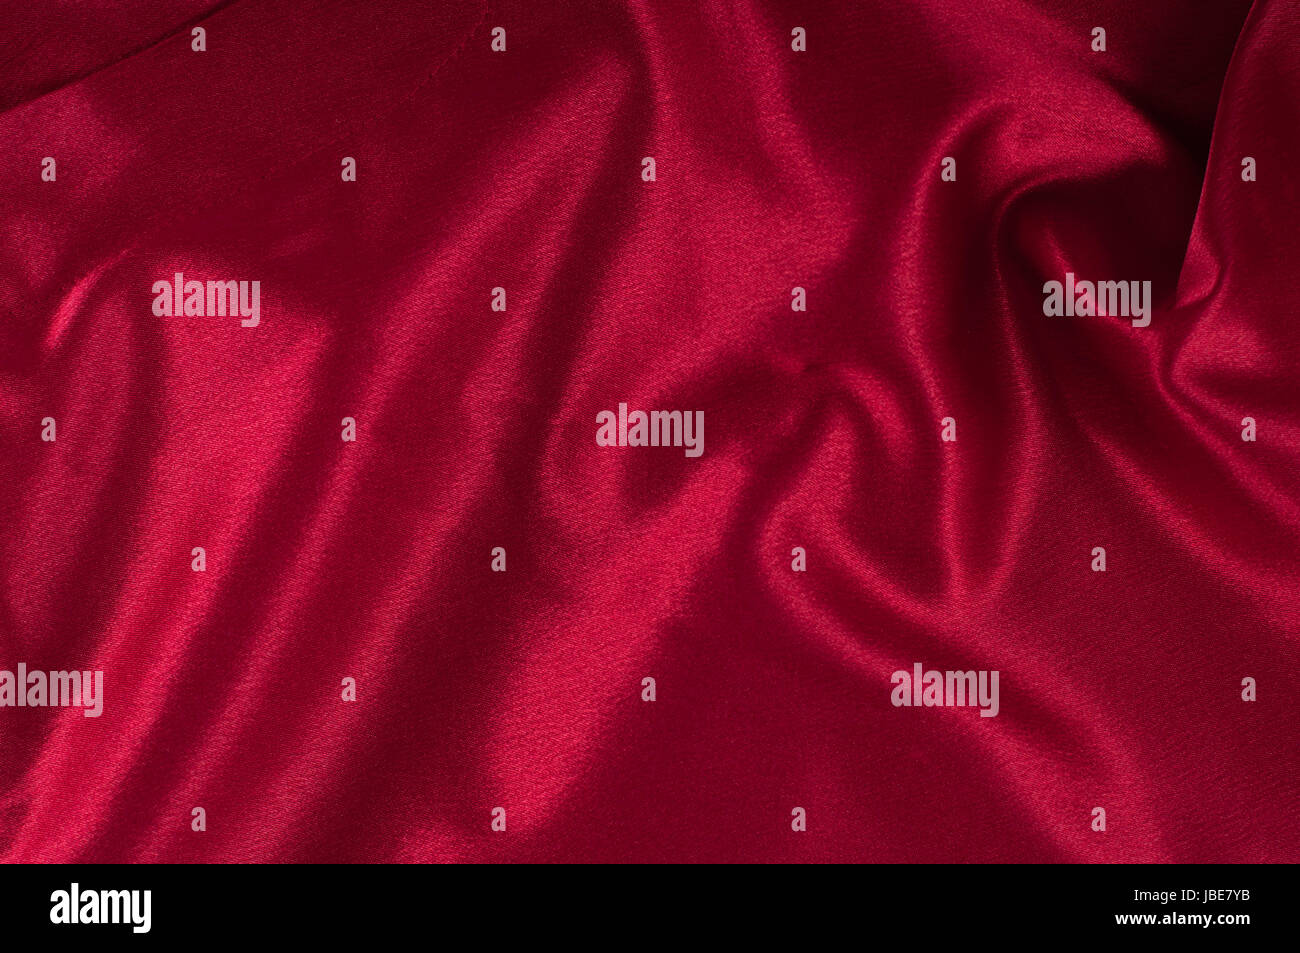 Red silky textile background Stock Photo